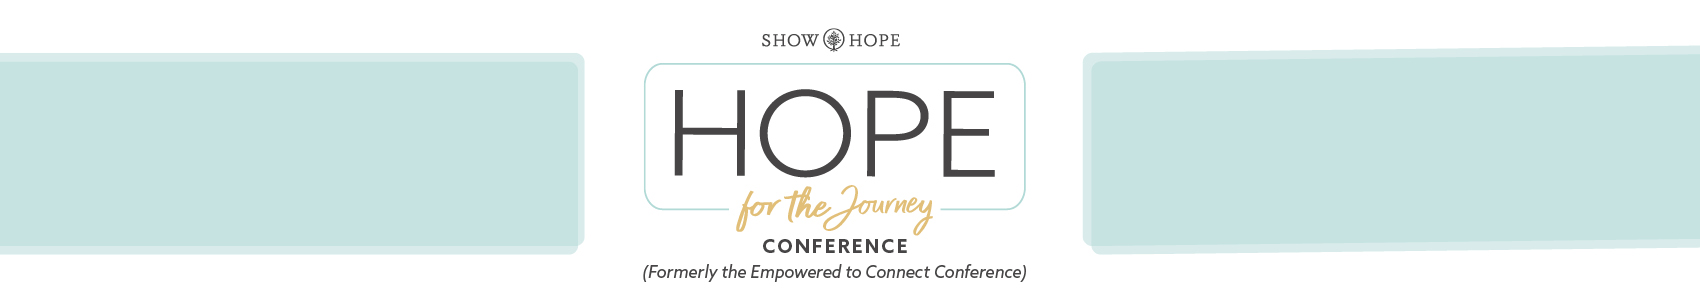 Hope for the Journey Conference banner